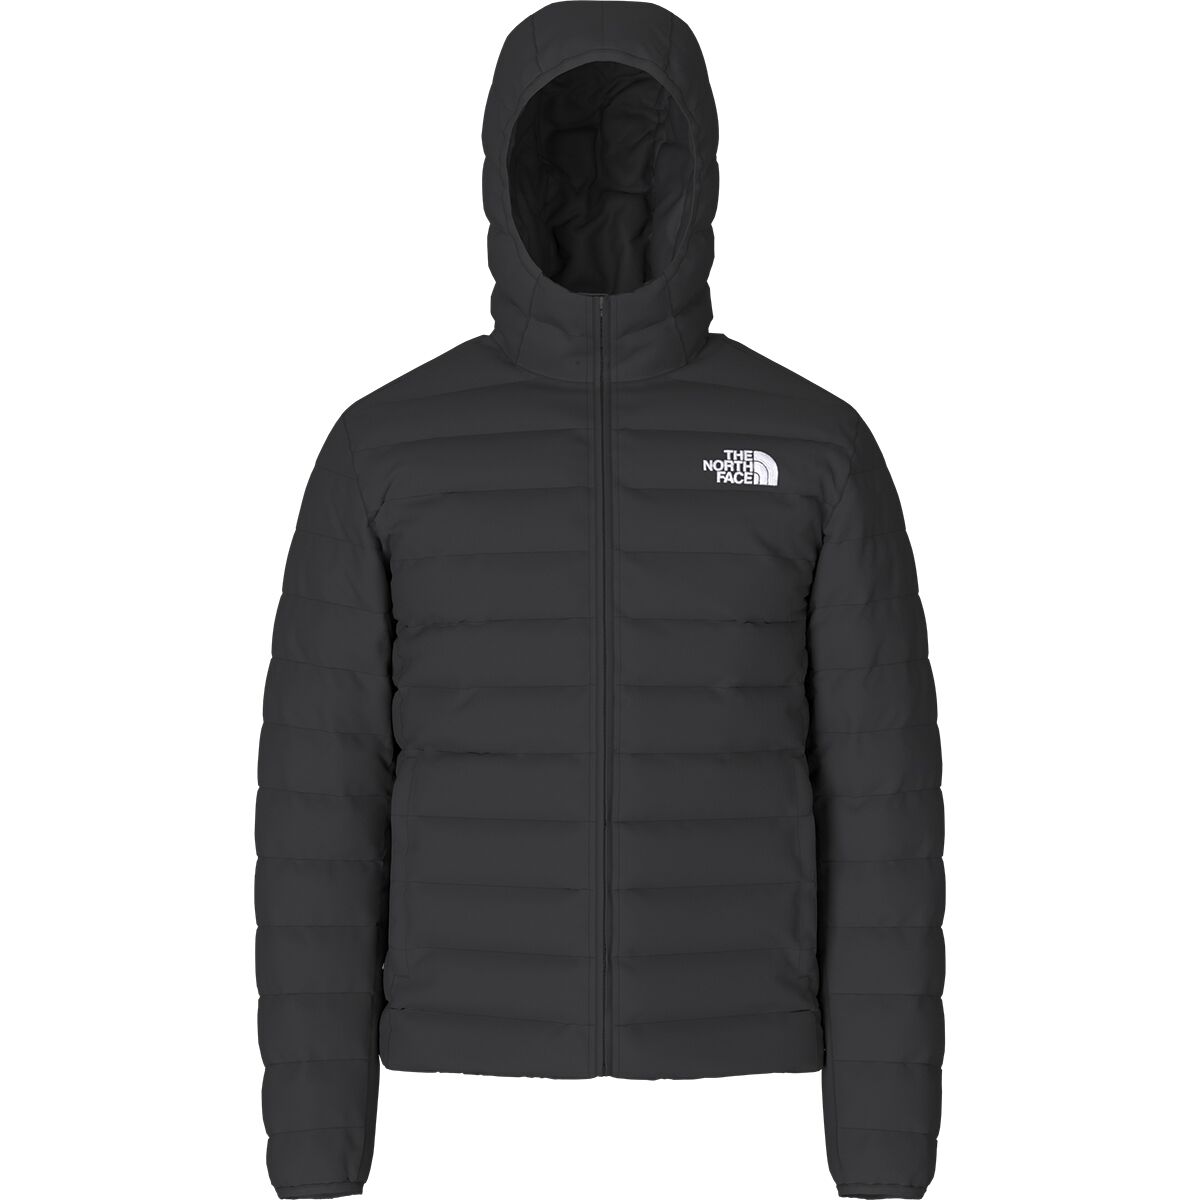 The North Face Flare Hooded Jacket - Men's